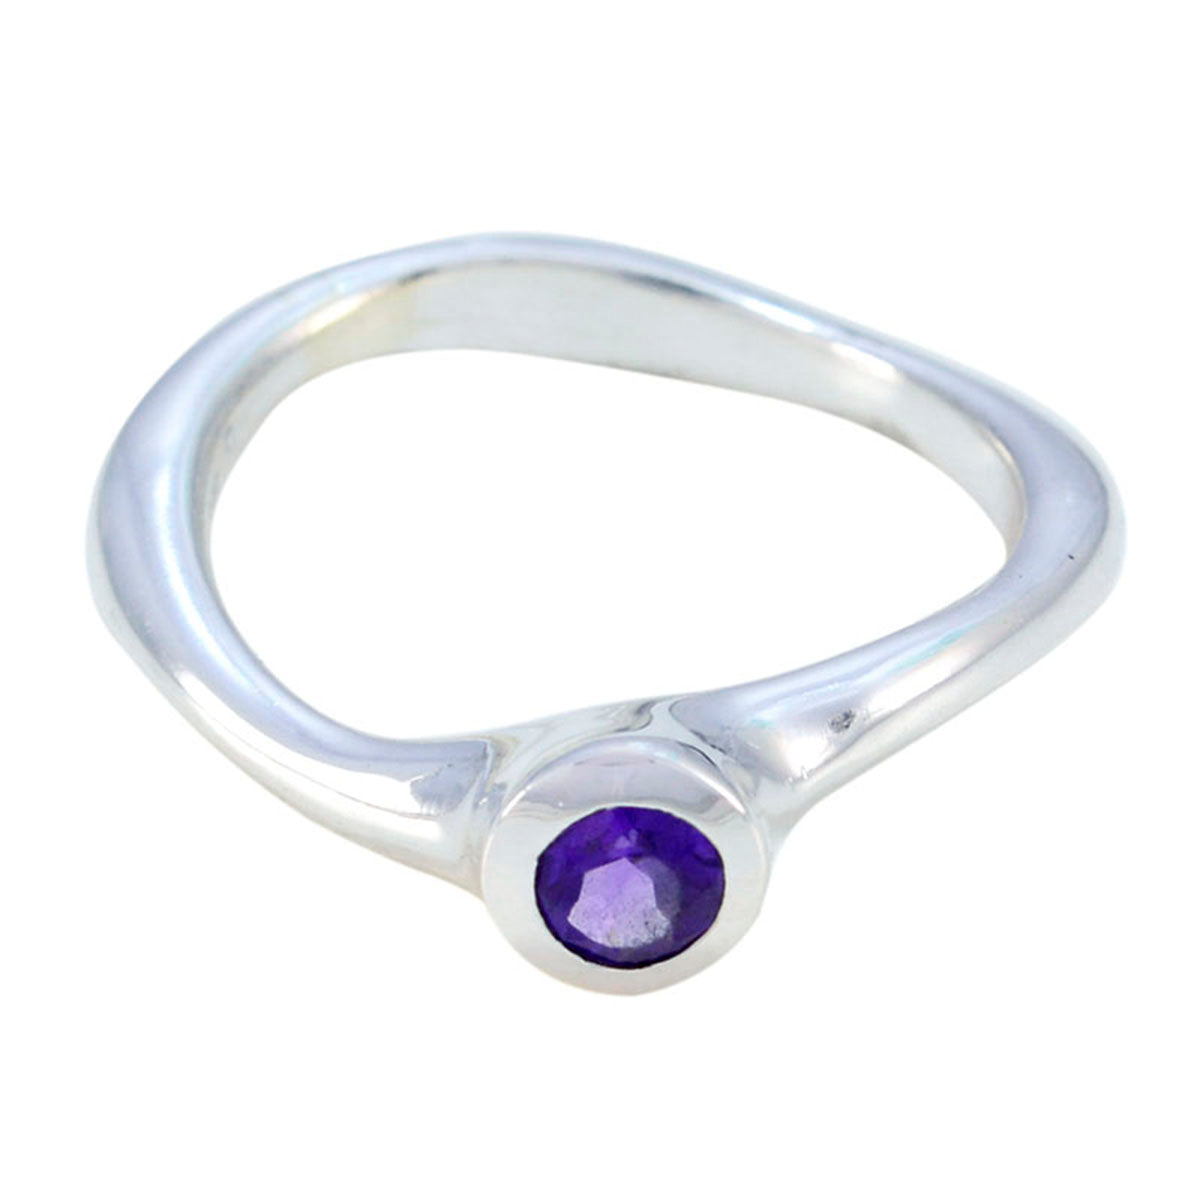 Riyo Goods Stone Amethyst 925 Sterling Silver Rings Boutique Jewelry